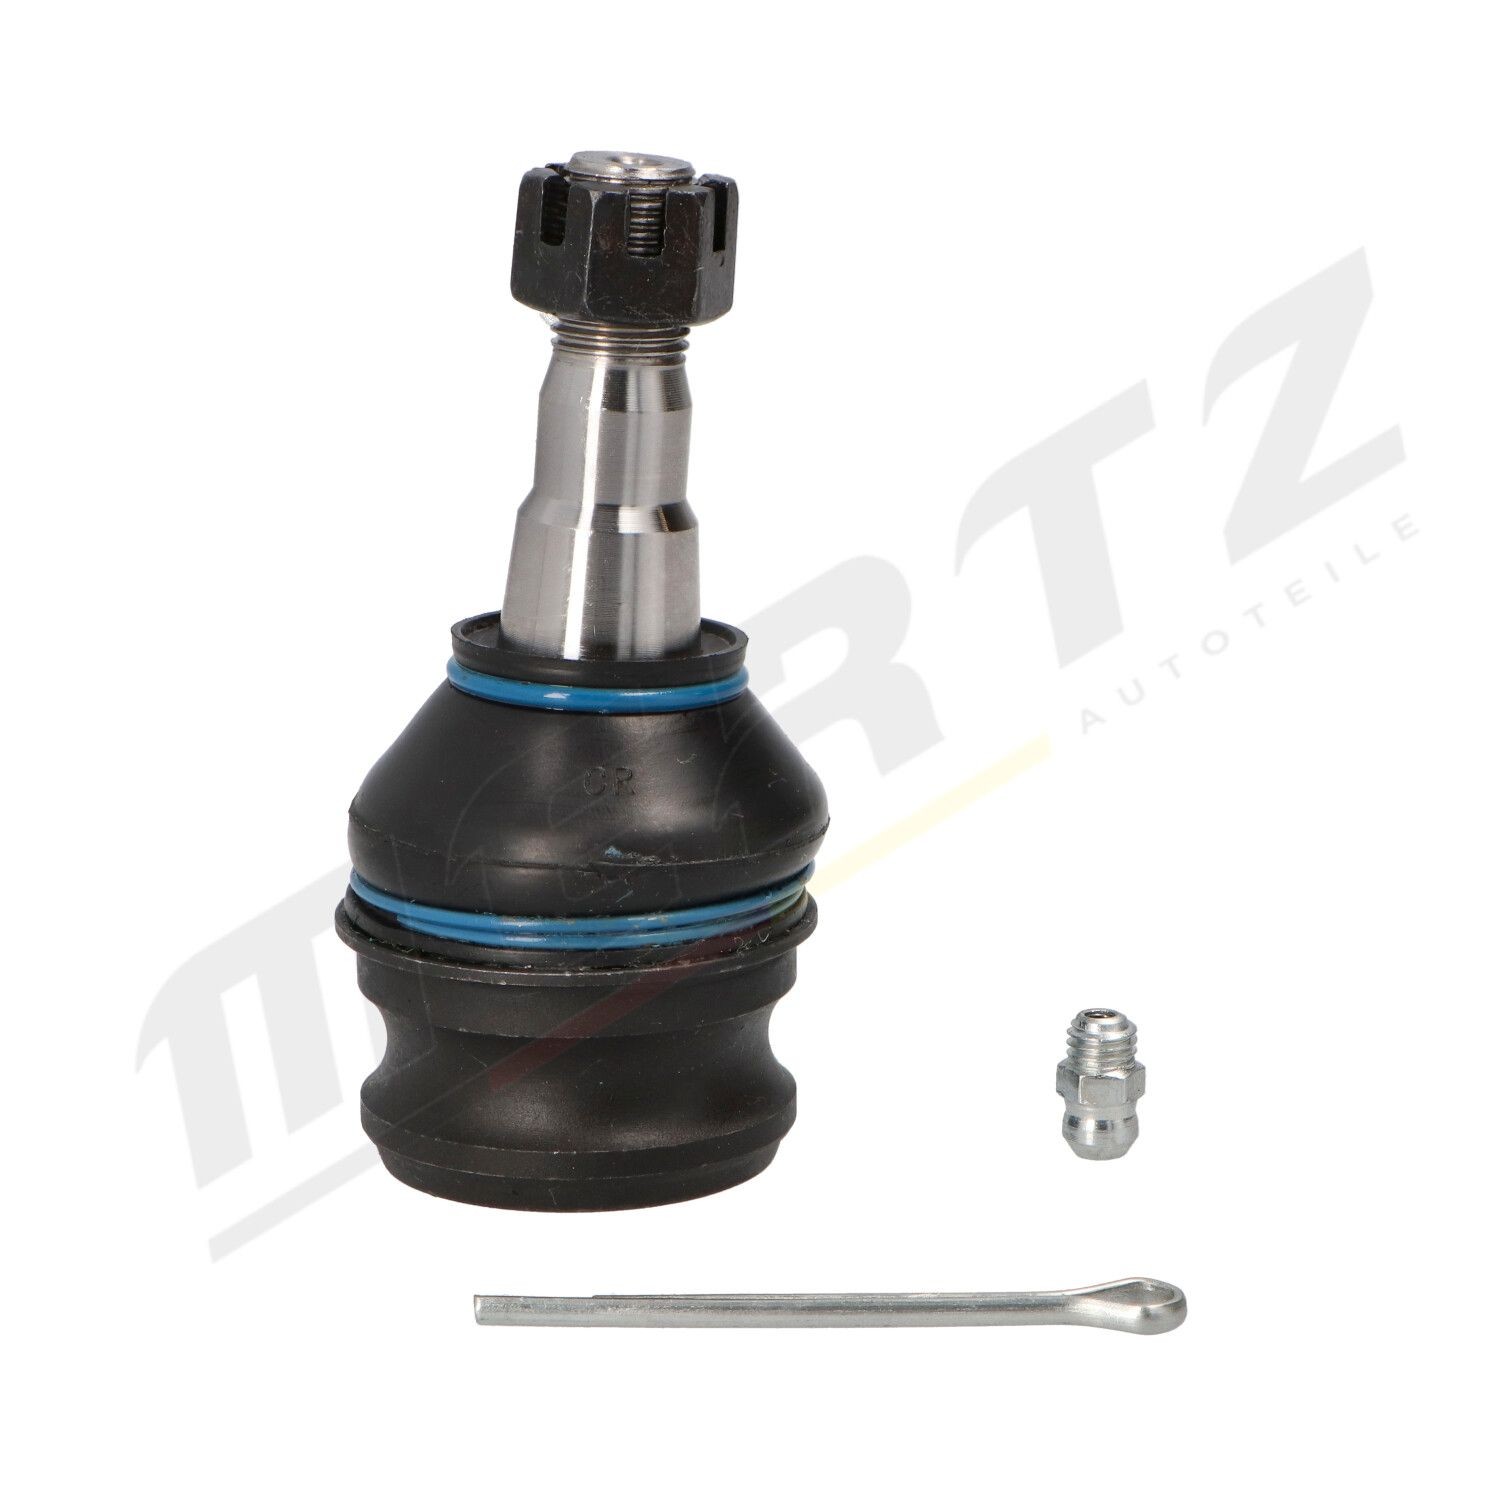 Ball joint MERTZ Front Axle Left, Front Axle Right, with nut, 15,5mm, M12x1,25mm - M-S1006